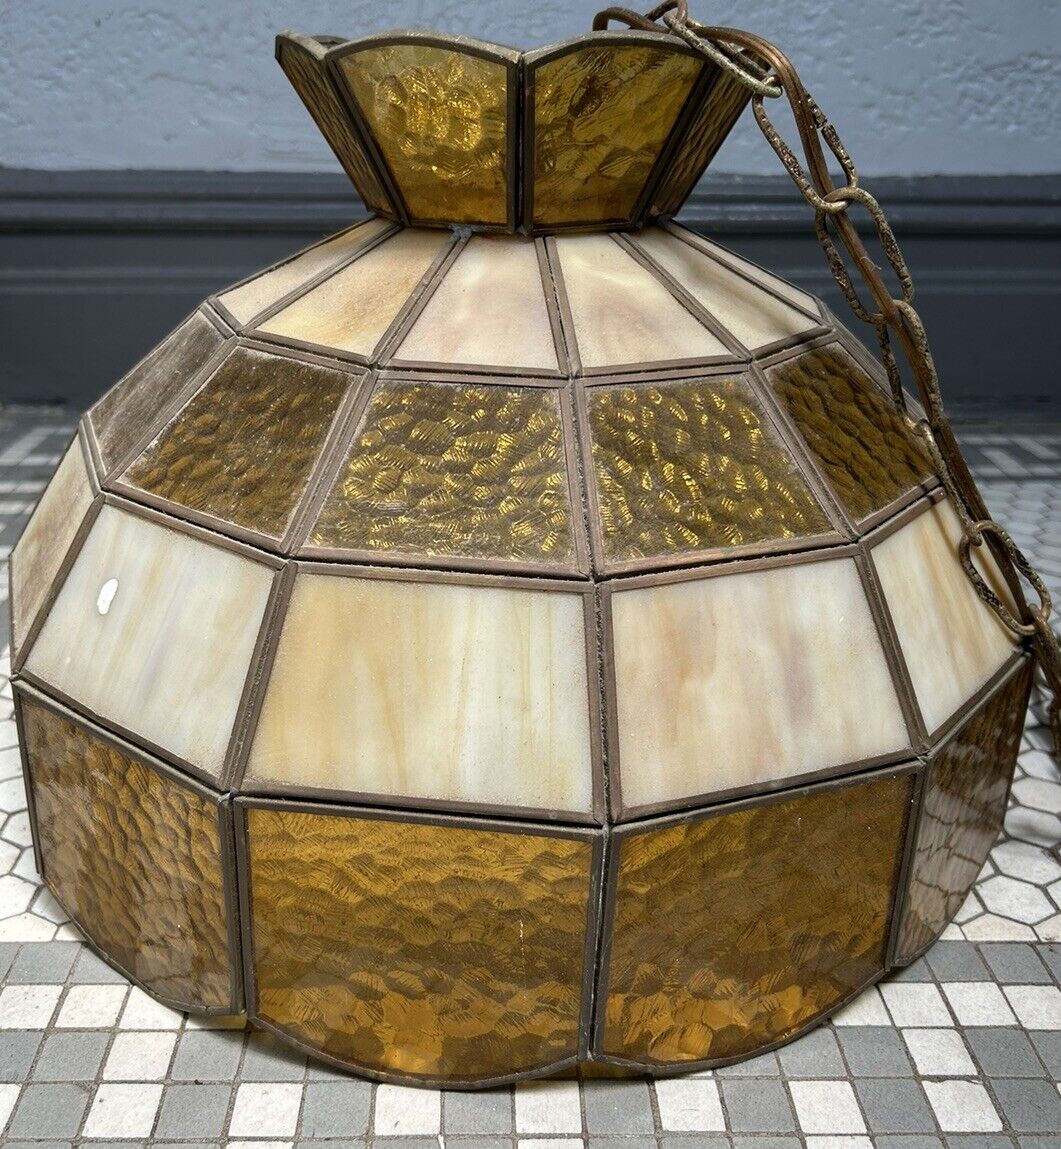 Vintage Stained Glass Hanging/Ceiling Light Fixture - Earth Tones Tan/Brown